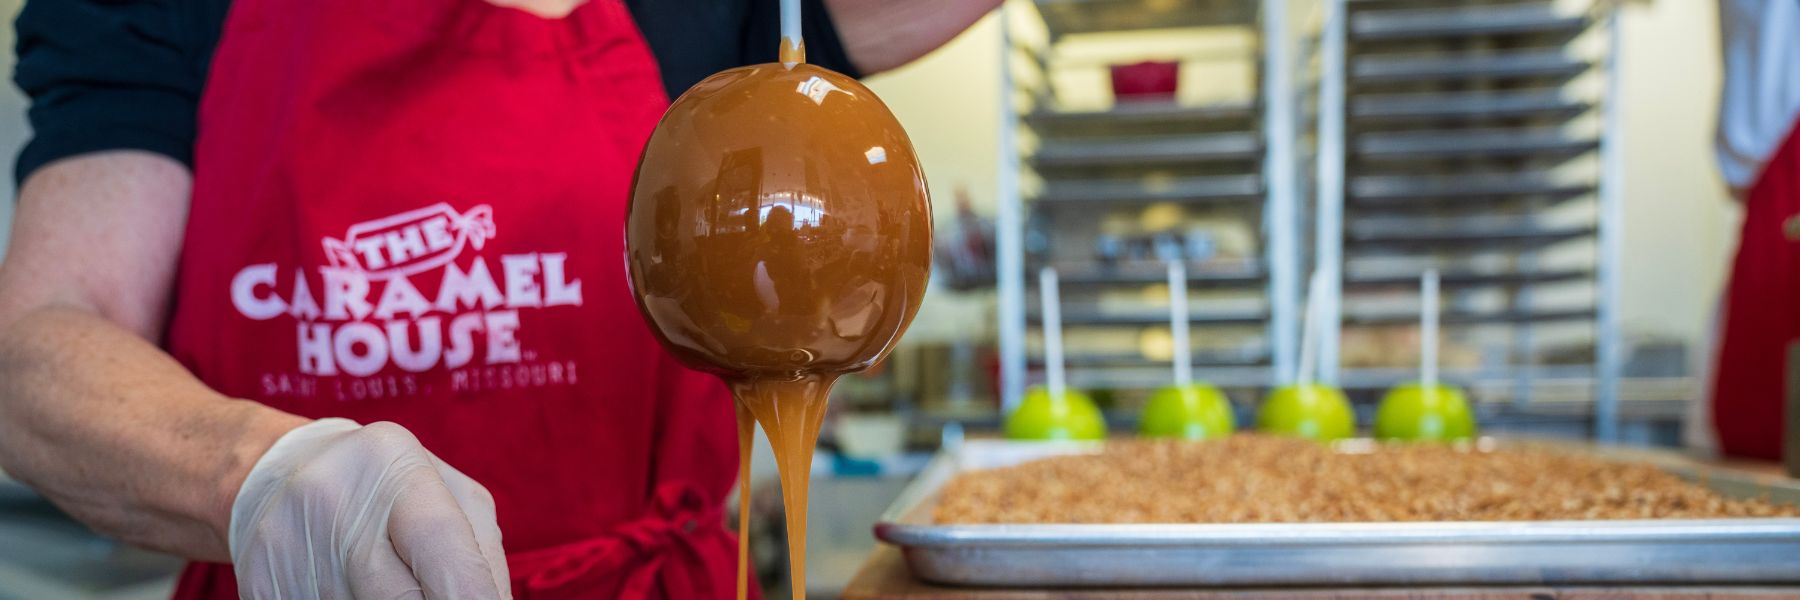 Janet Shulman hand-dips caramel apples at The Caramel House in St. Louis.